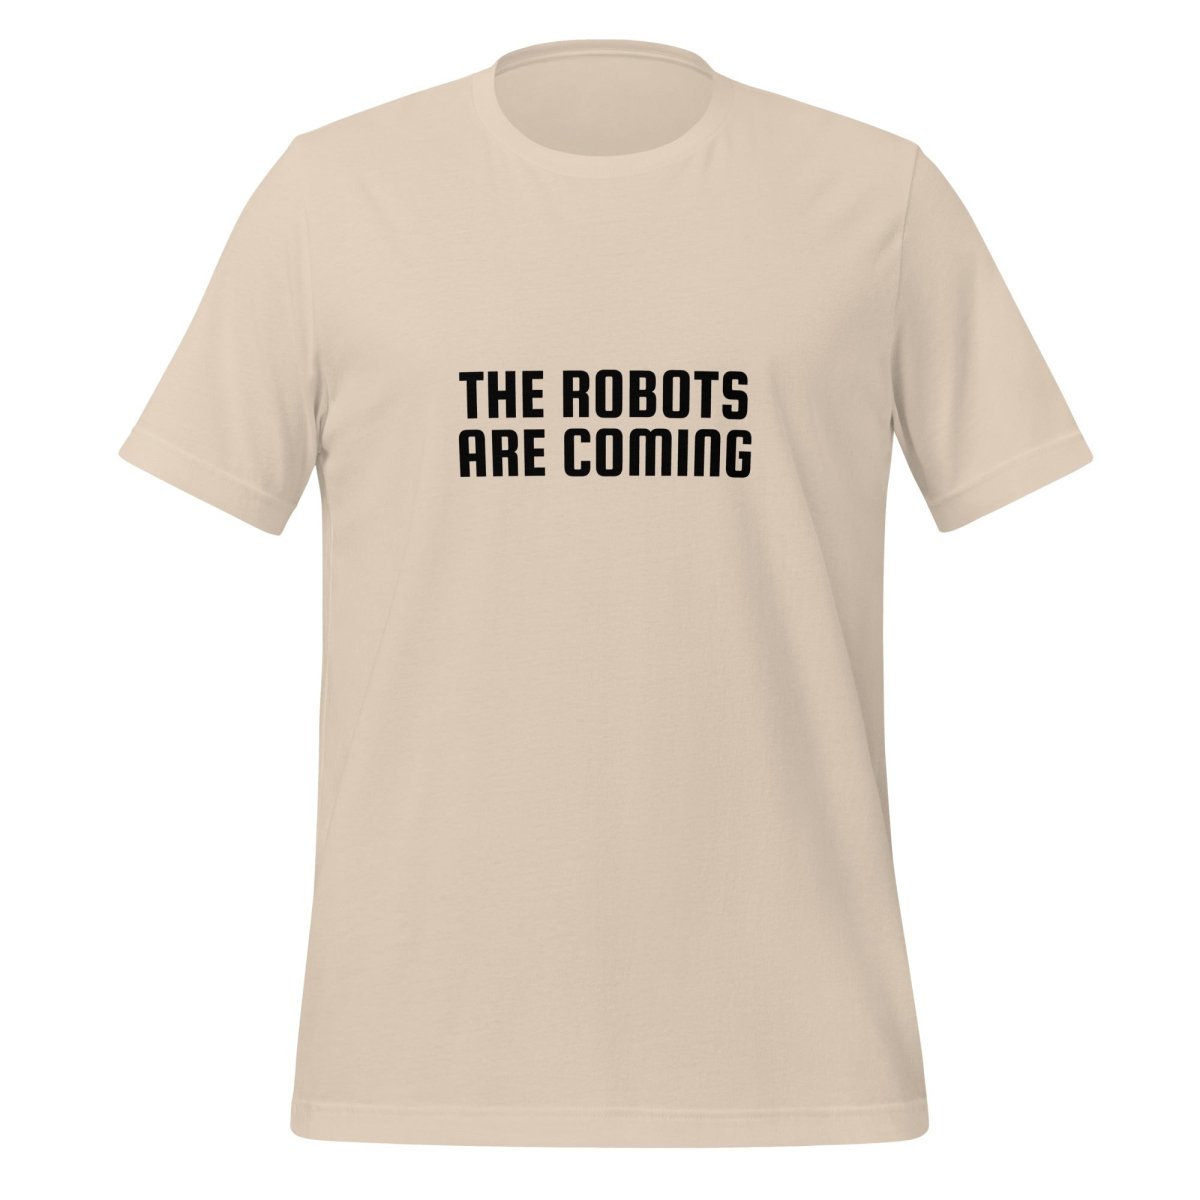 The Robots Are Coming in Black T - Shirt 2 (unisex) - Soft Cream - AI Store